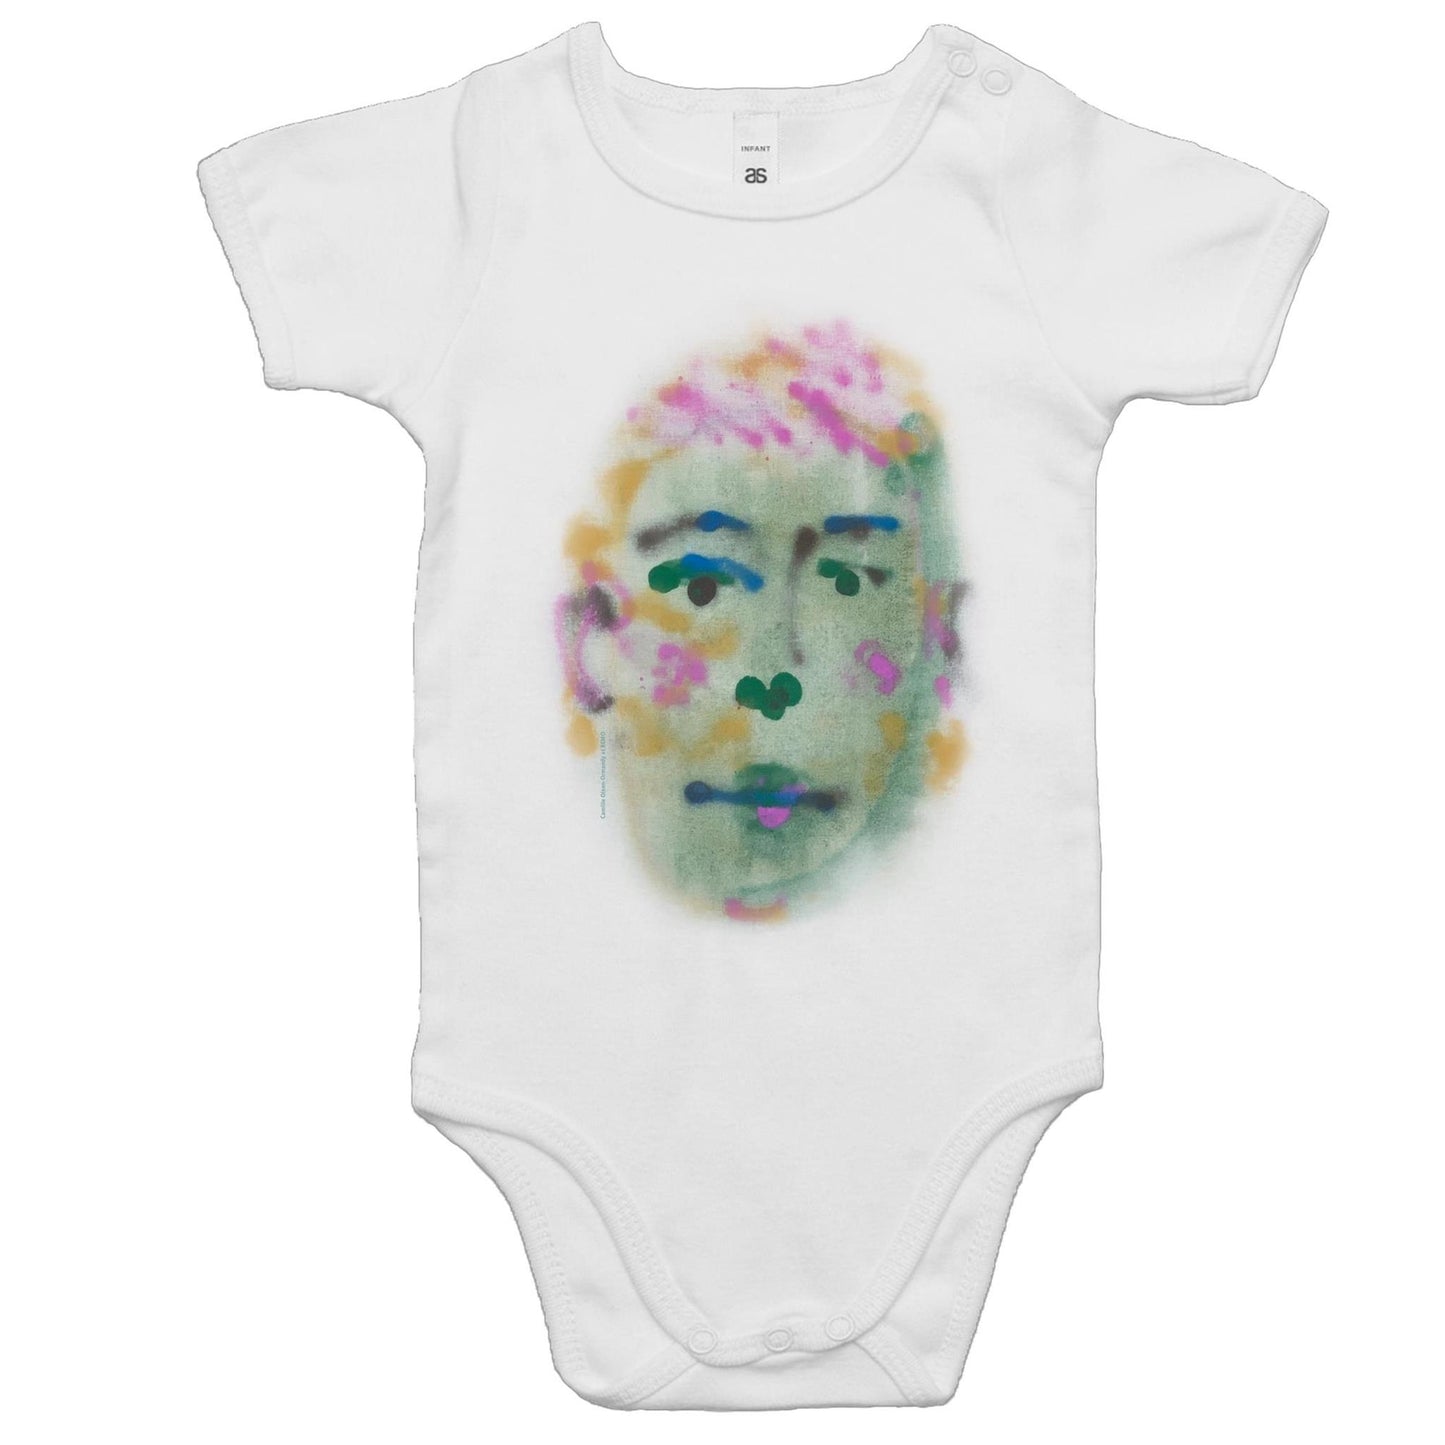 Green Face Rompers for Babies